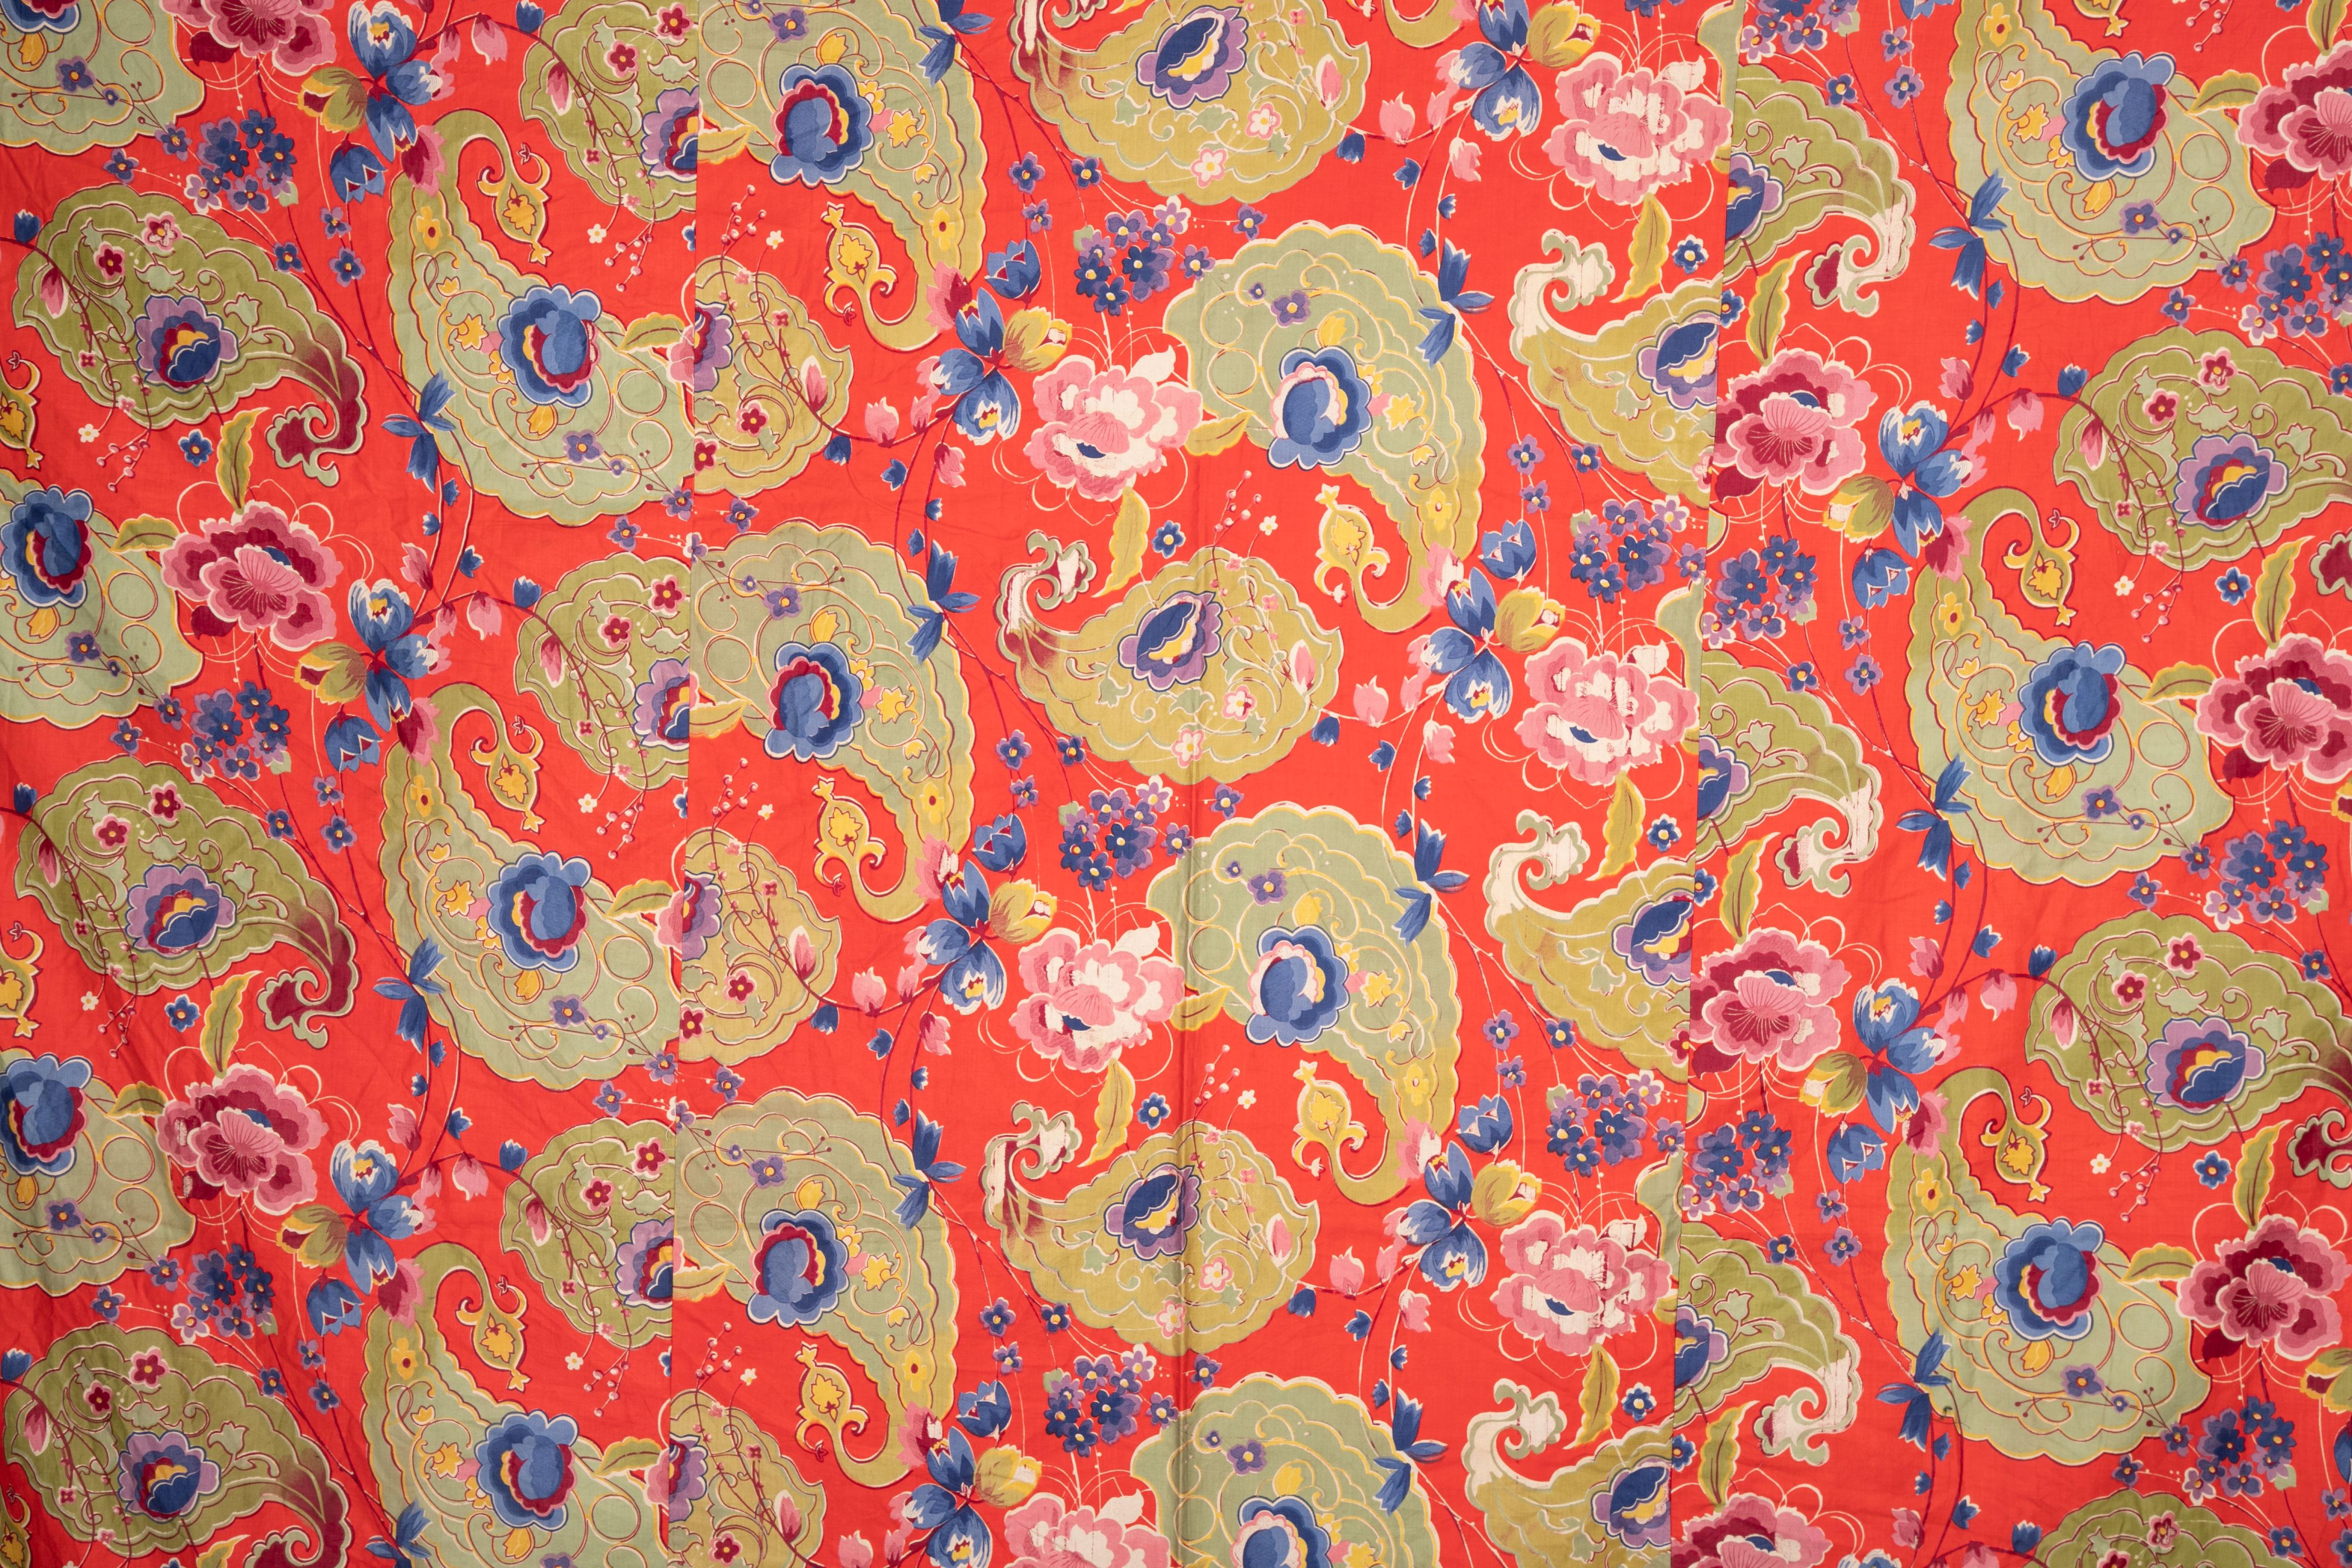 Woven Russian Printed Cotton Fabric Panel, Mid-20th Century or Earlier For Sale